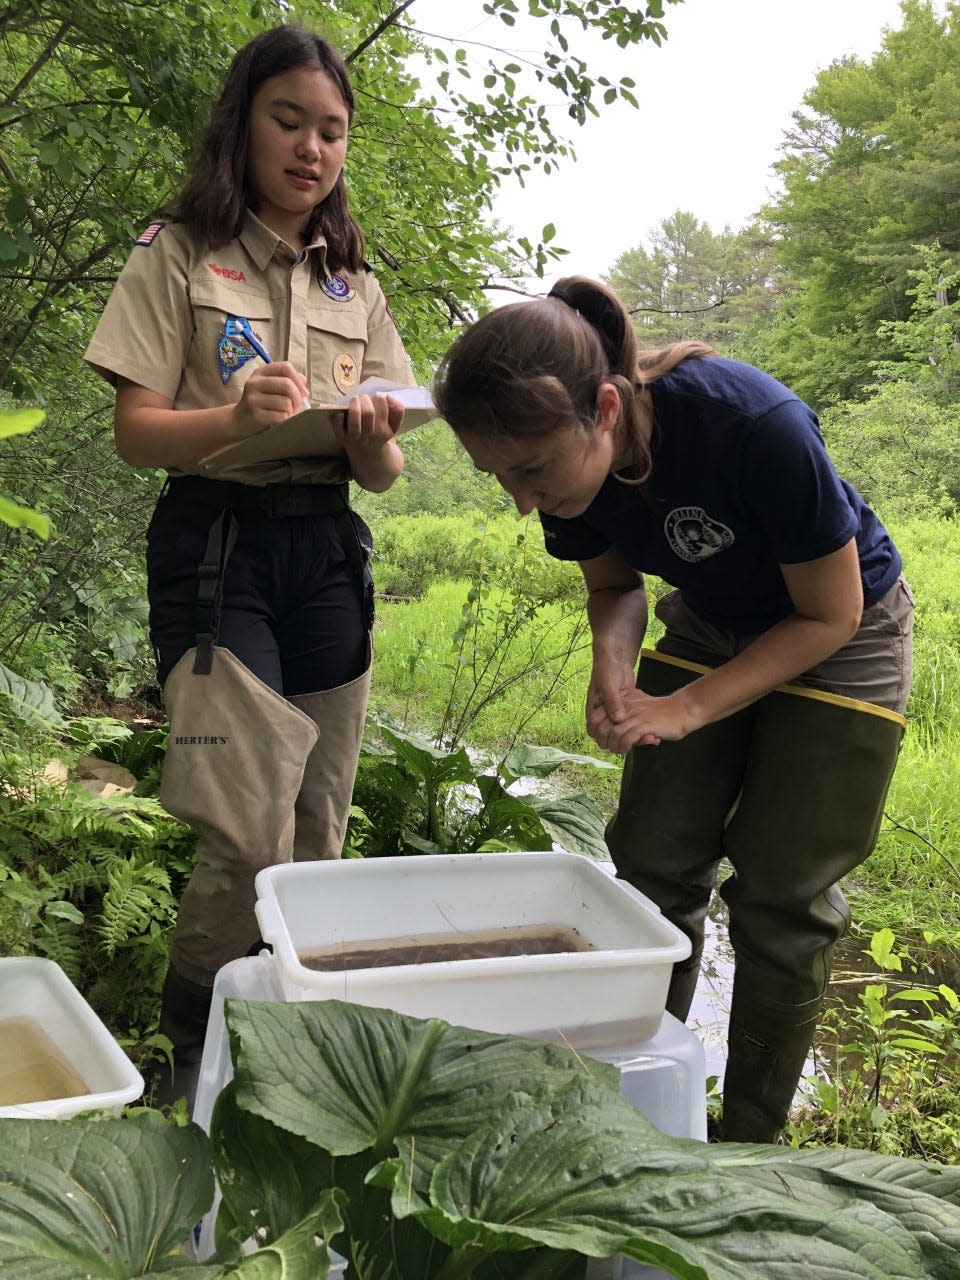 Local Girl Scout Aroha Walsh, left, and Tessa Houston, of the Maine Conservation Corps, collect samples from a stream off Brown Street in Kennebunk on June 23, 2022.